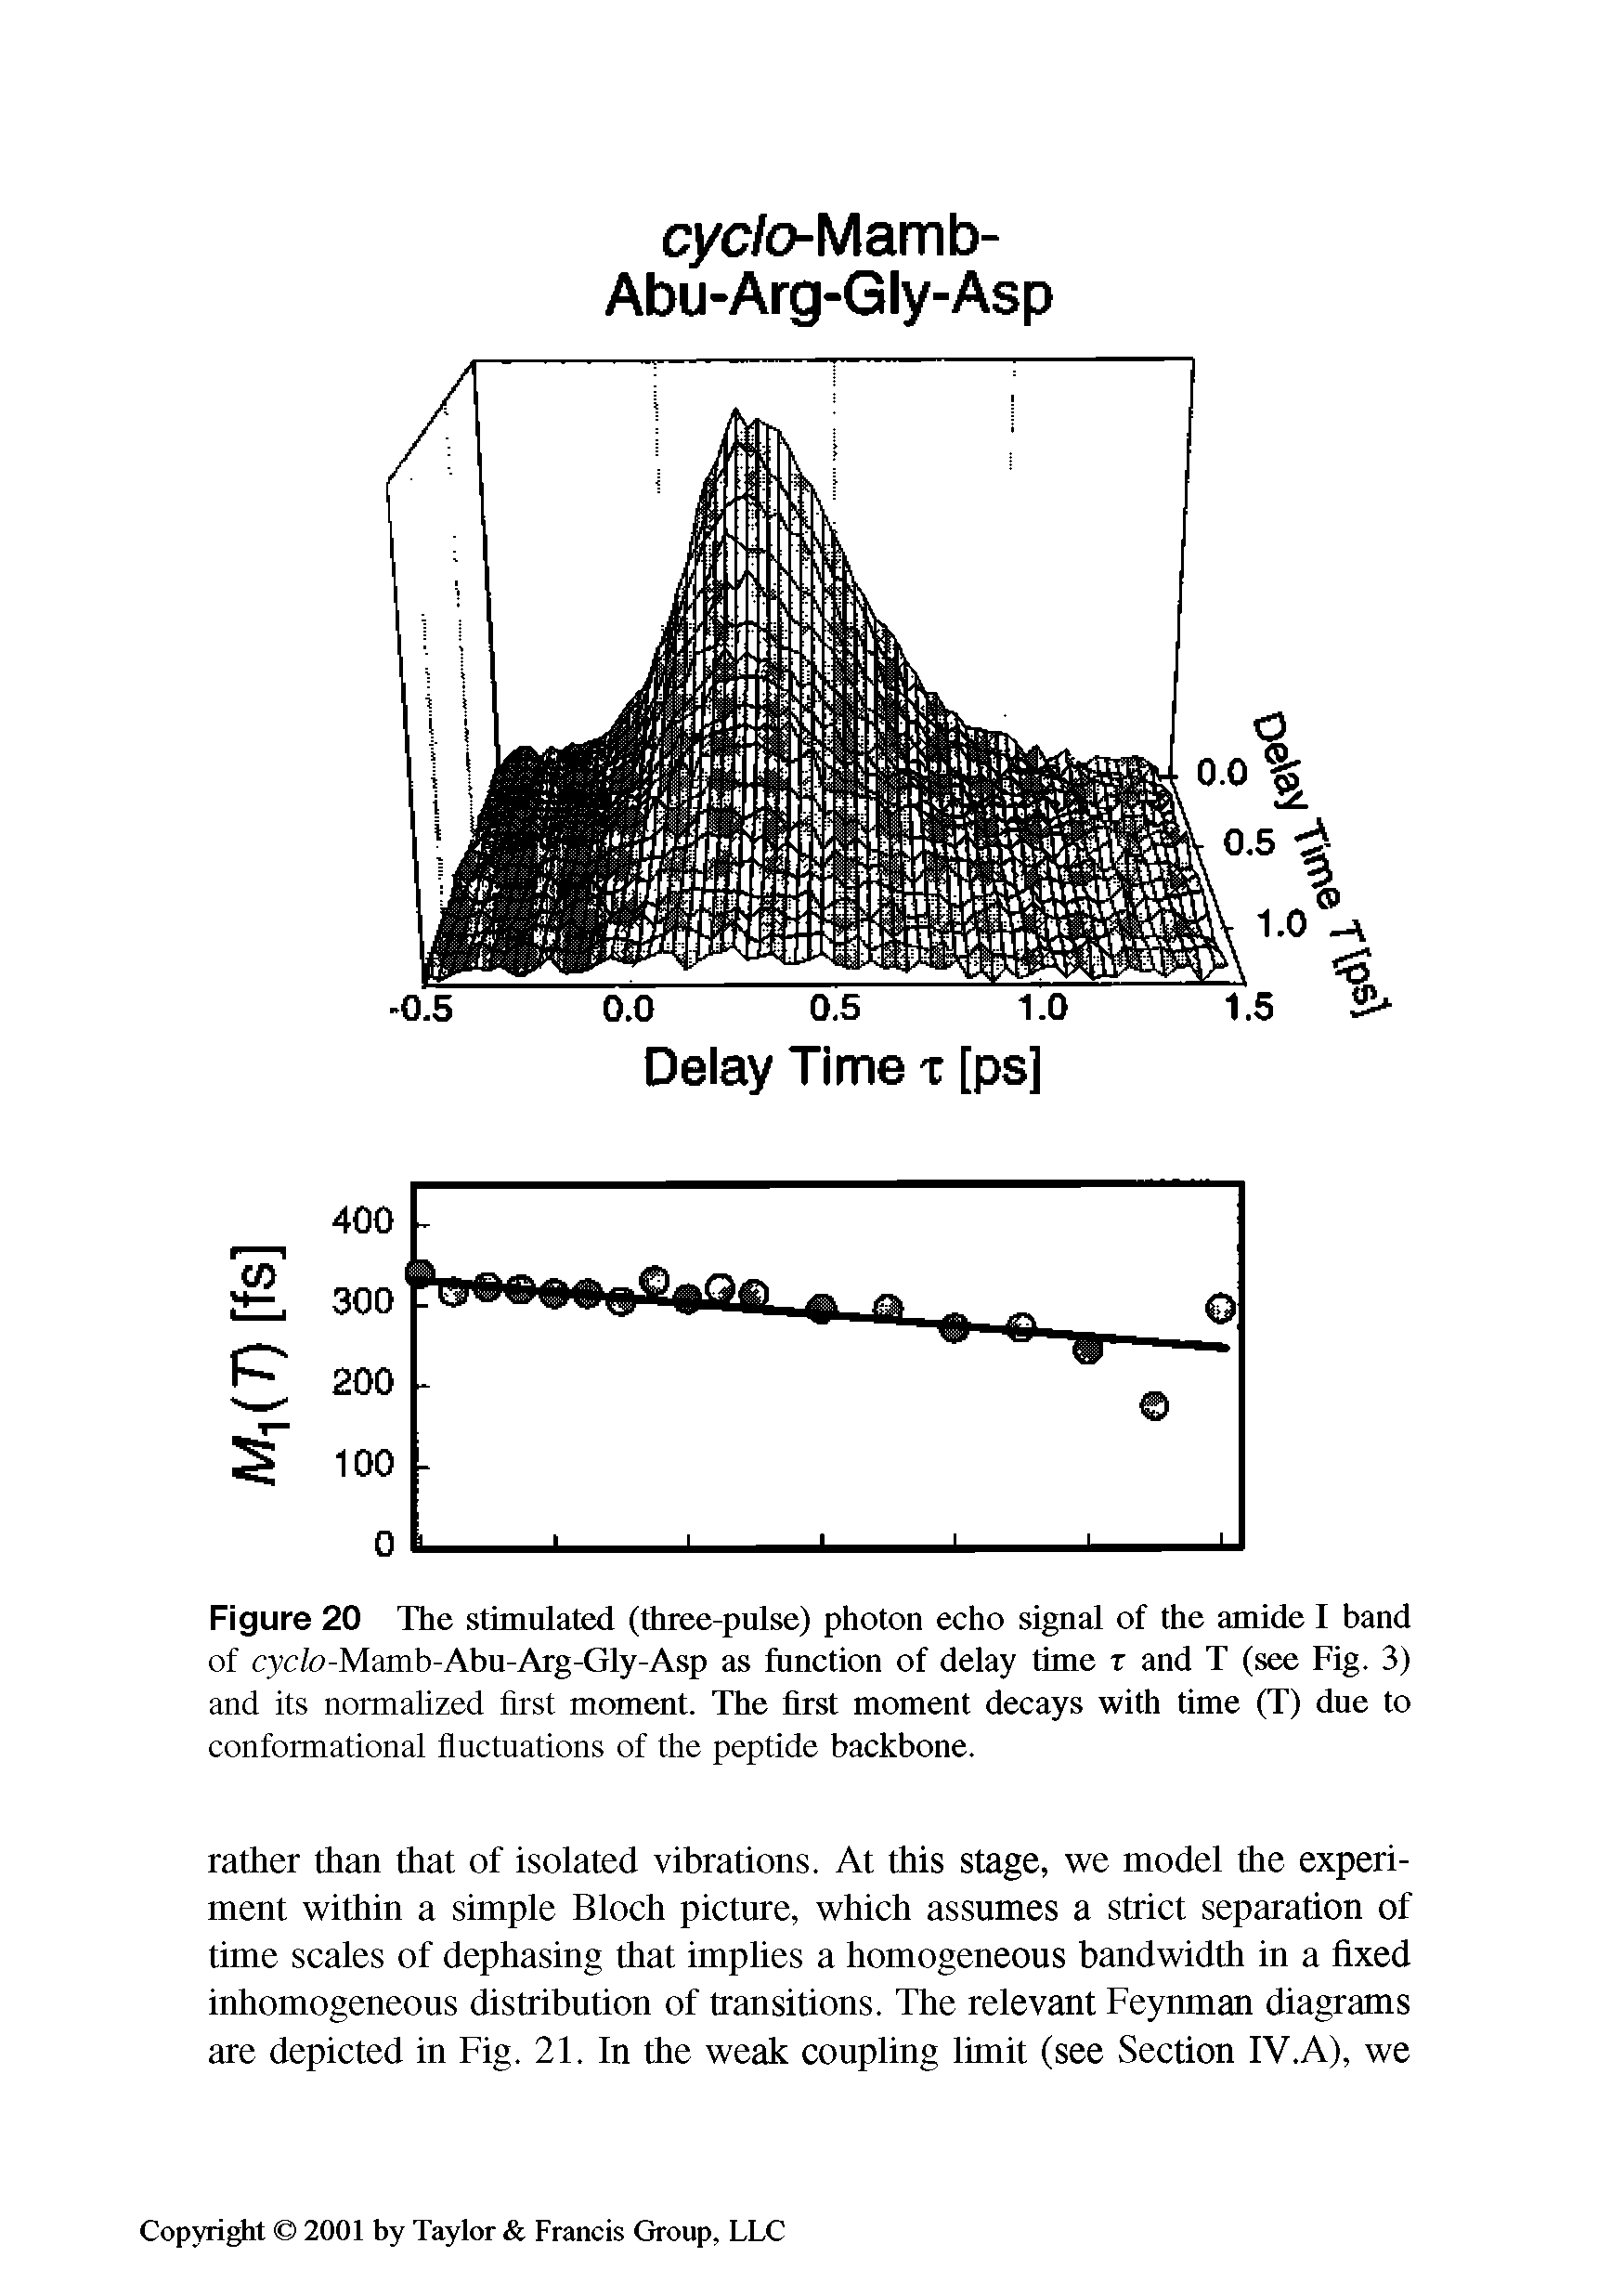 Figure 20 The stimulated (three-pulse) photon echo signal of the amide I band of cyc/o-Mamb-Abu-Arg-Gly-Asp as function of delay time r and T (see Fig. 3) and its normalized first moment. The first moment decays with time (T) due to...